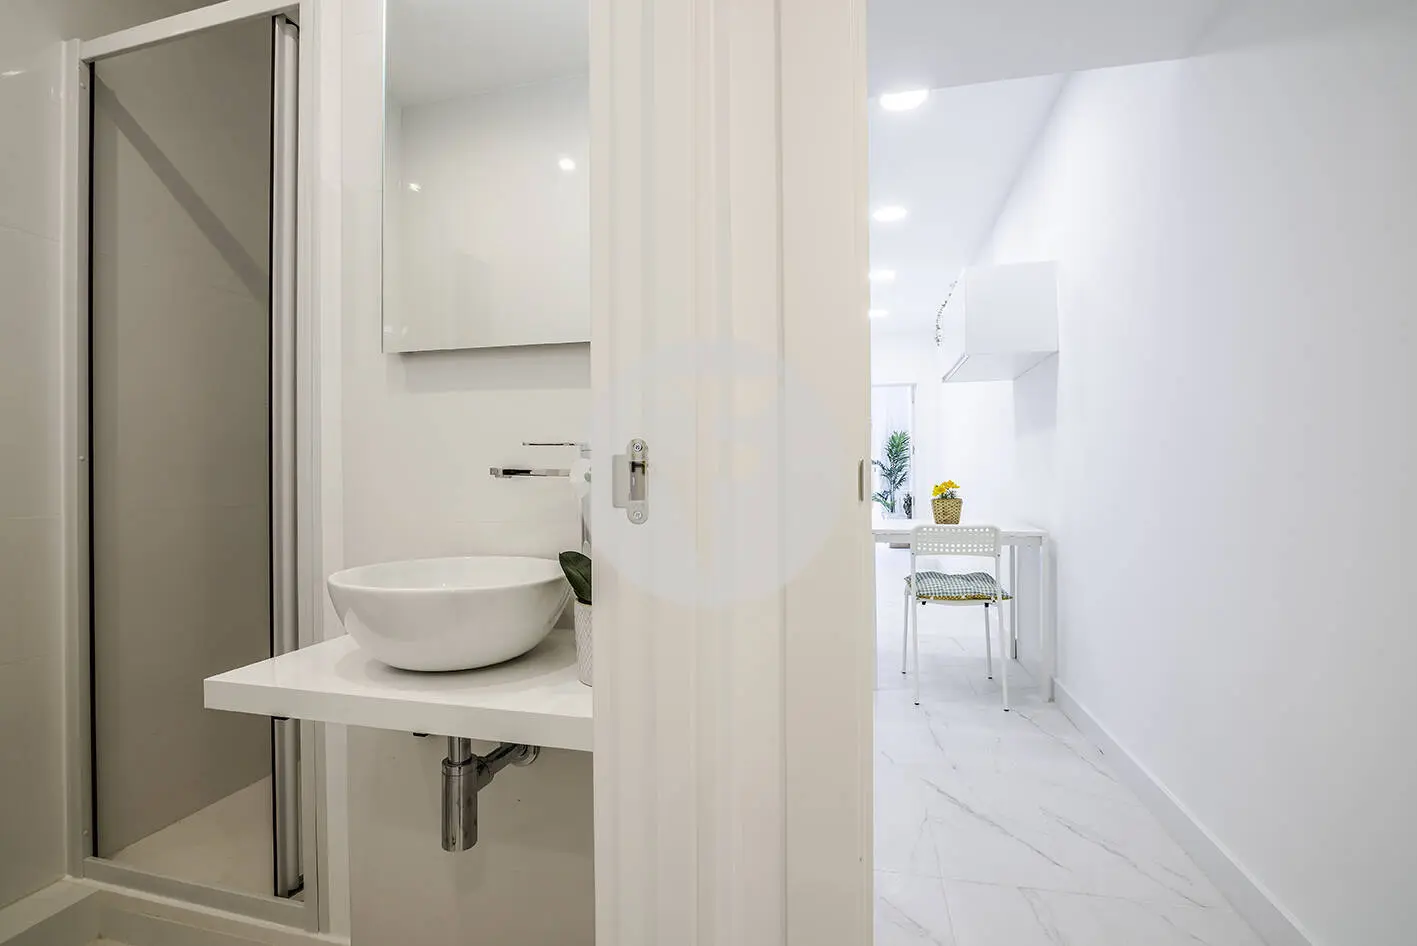 Brand new completely renovated apartment on Aragó street in the heart of El Clot in Barcelona. 27